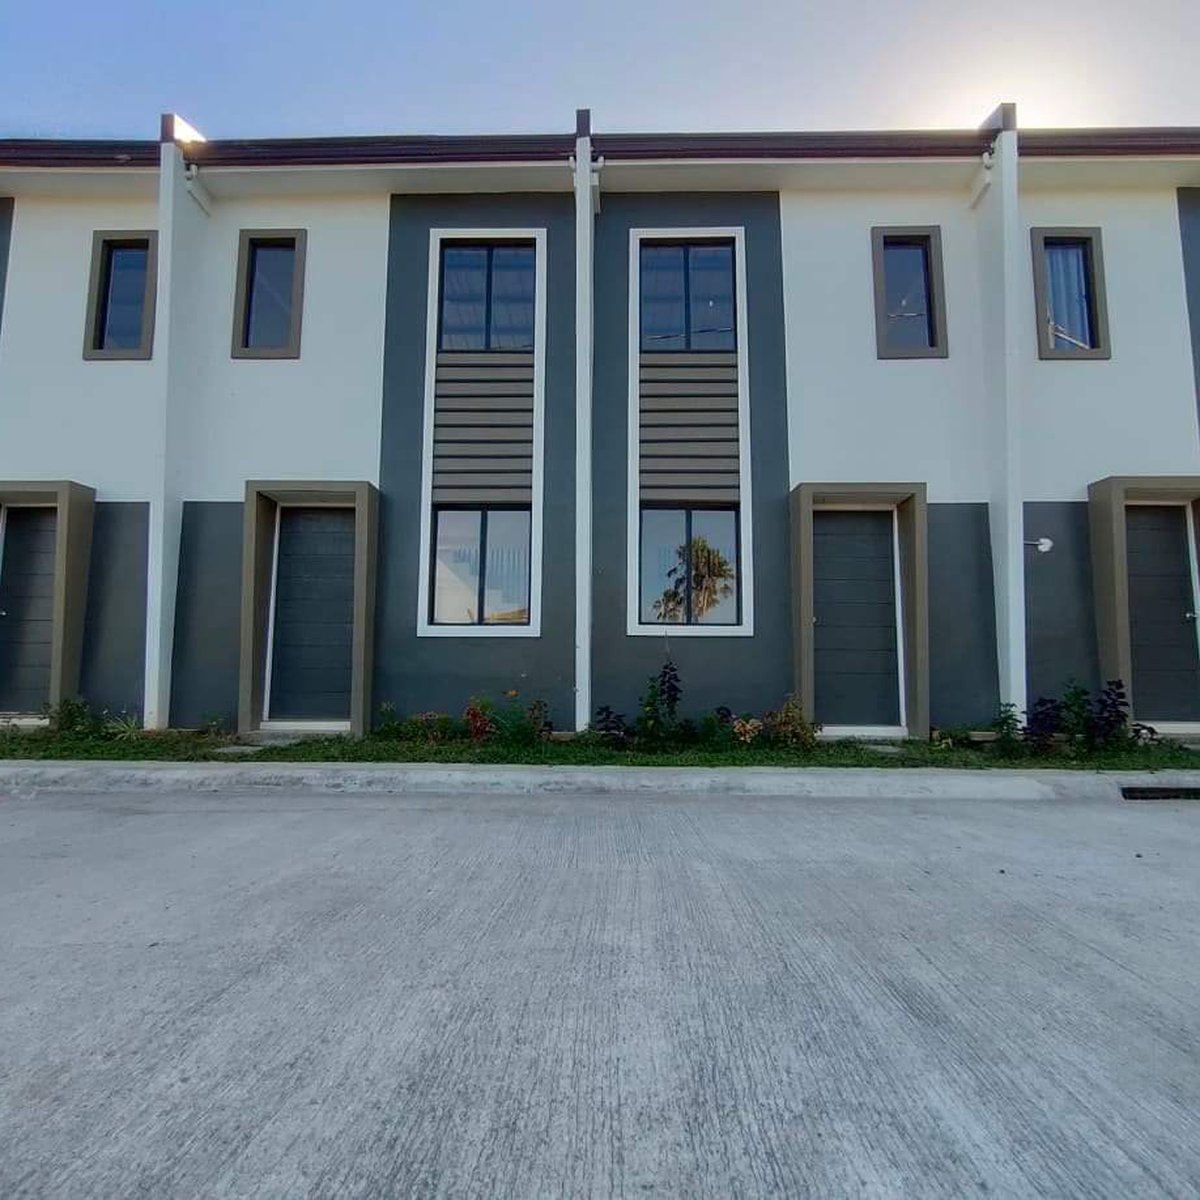 2 bedrooms Townhouse for sale in baliuag Bulacan